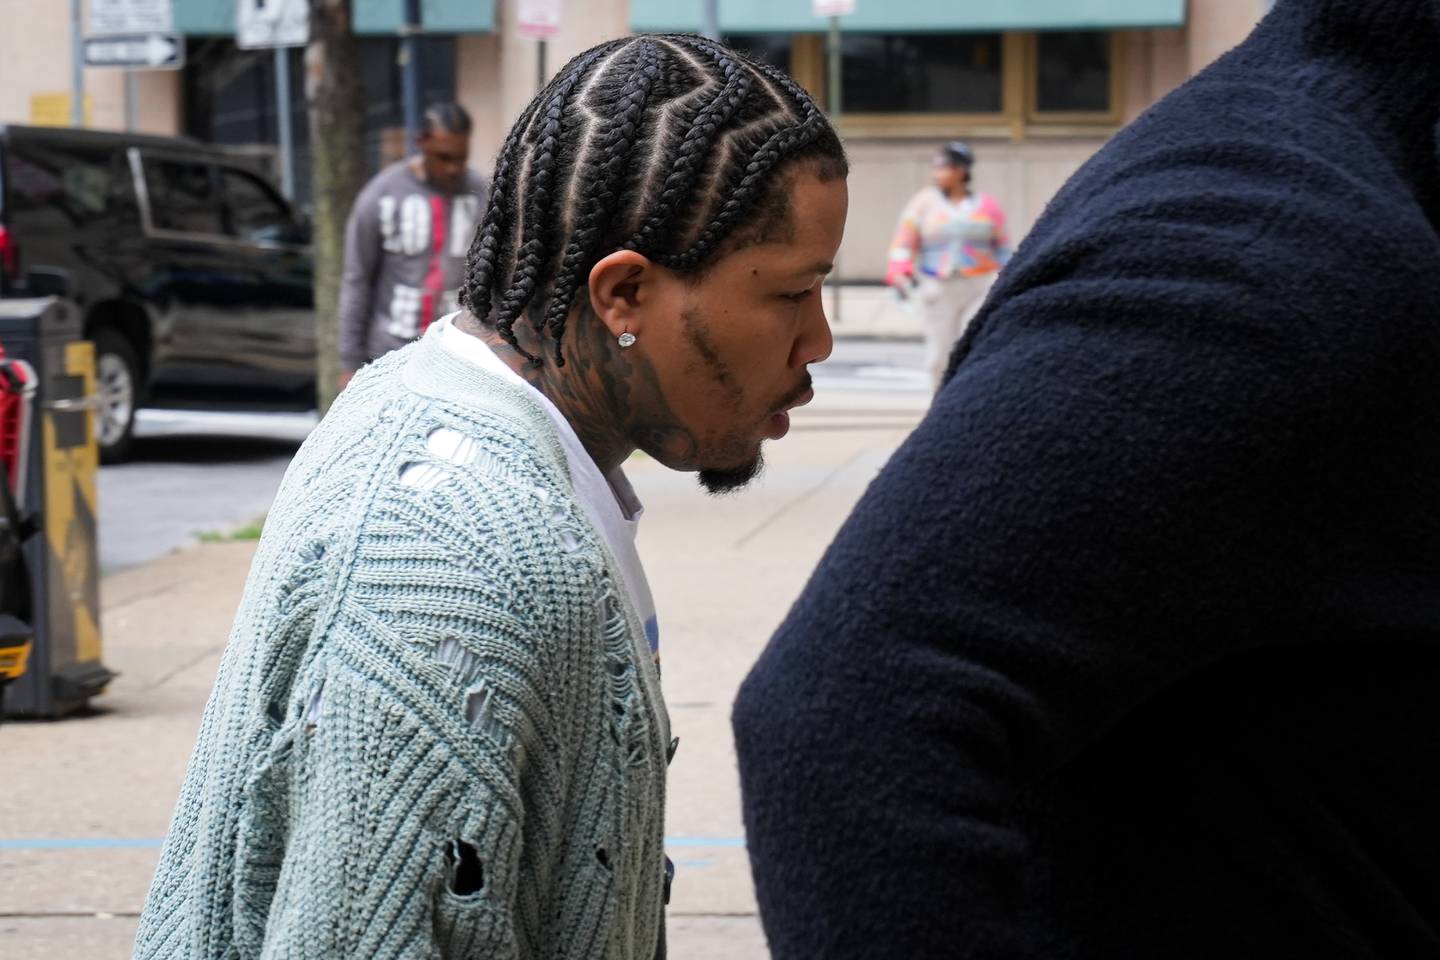 Baltimore boxing champion Gervonta “Tank” Davis arrives for his sentencing at the Elijah E. Cummings Courthouse on Friday, May 5. Davis pleaded guilty to four traffic offenses in connection to a hit-and-run in 2020 that injured four people.